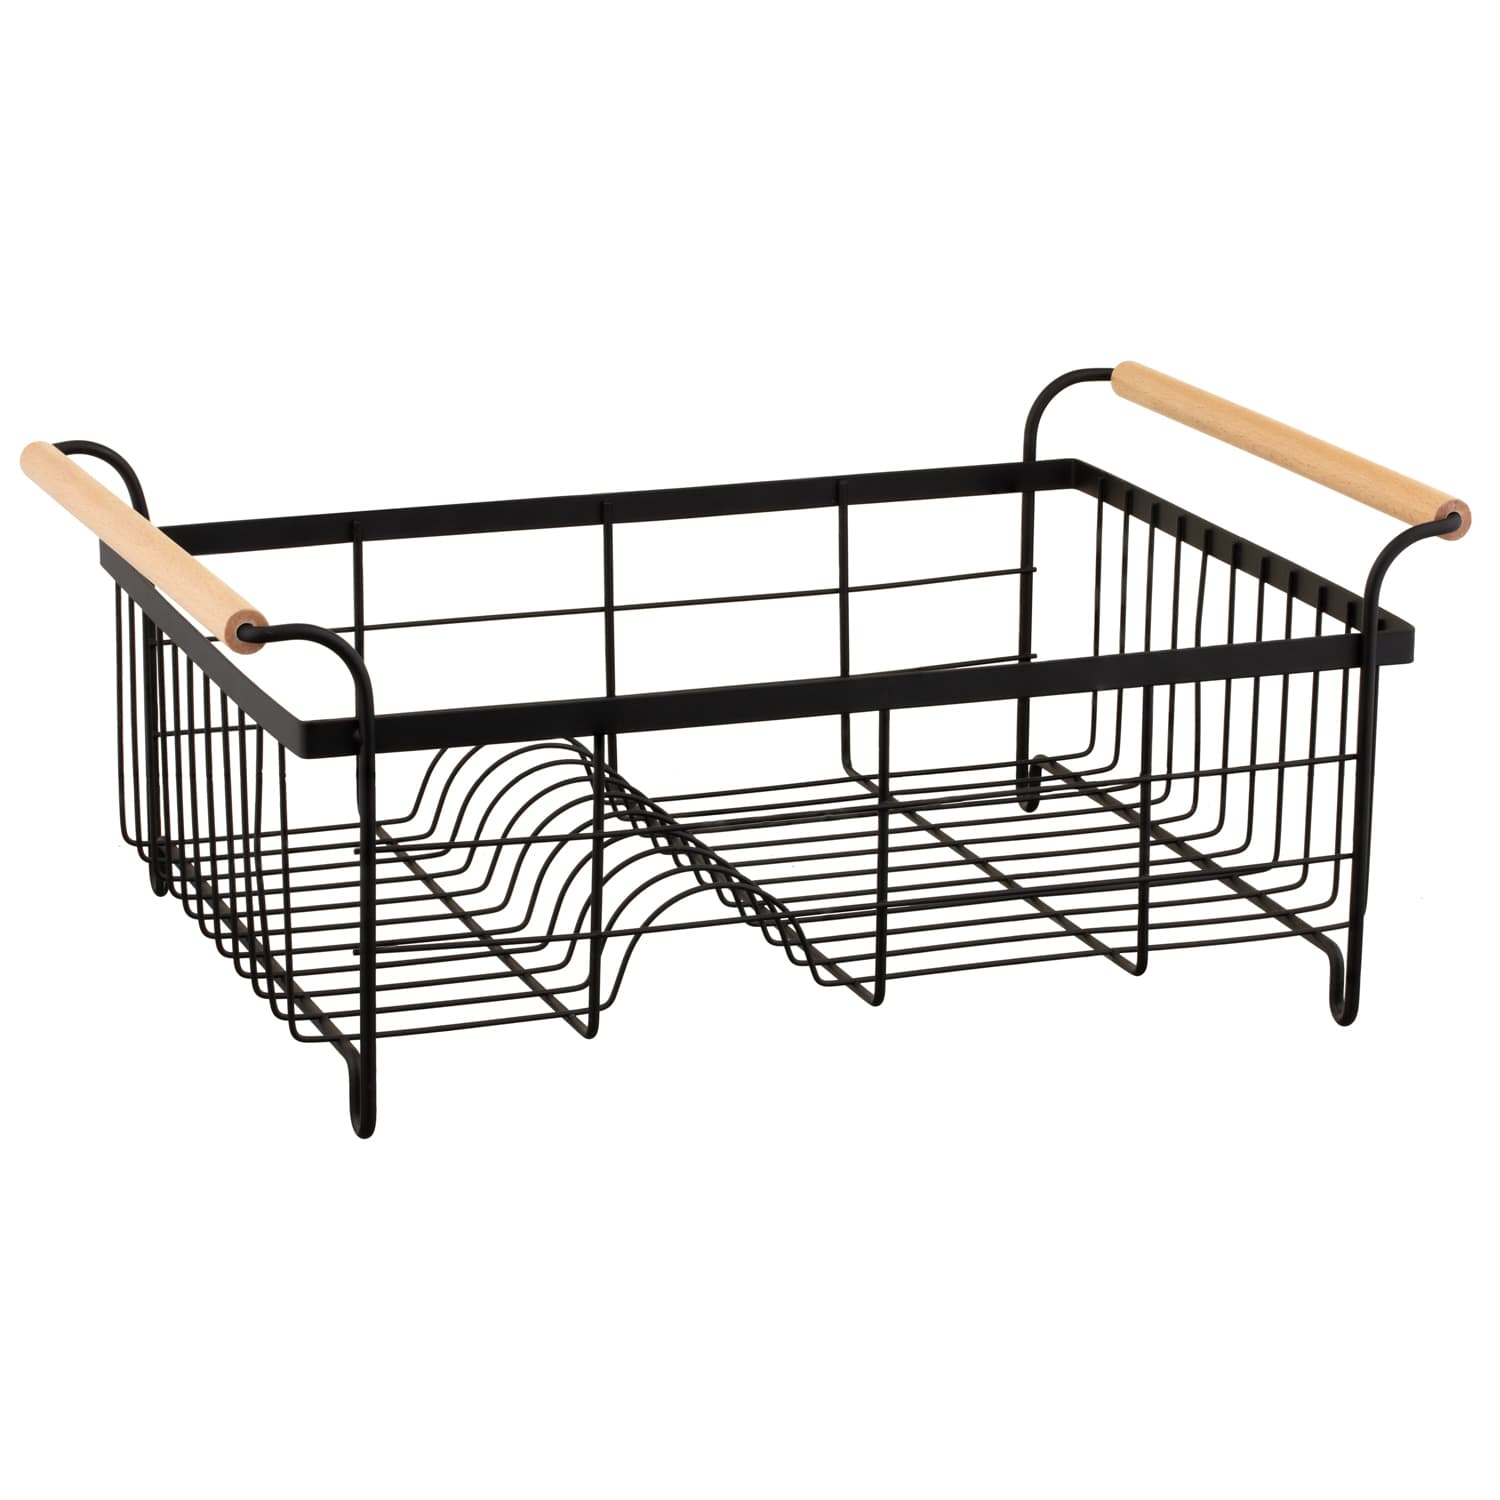 https://www.bmstores.co.uk/images/hpcProductImage/imgSource/369462-black-dish-drainer-with-wooden-handles.jpg